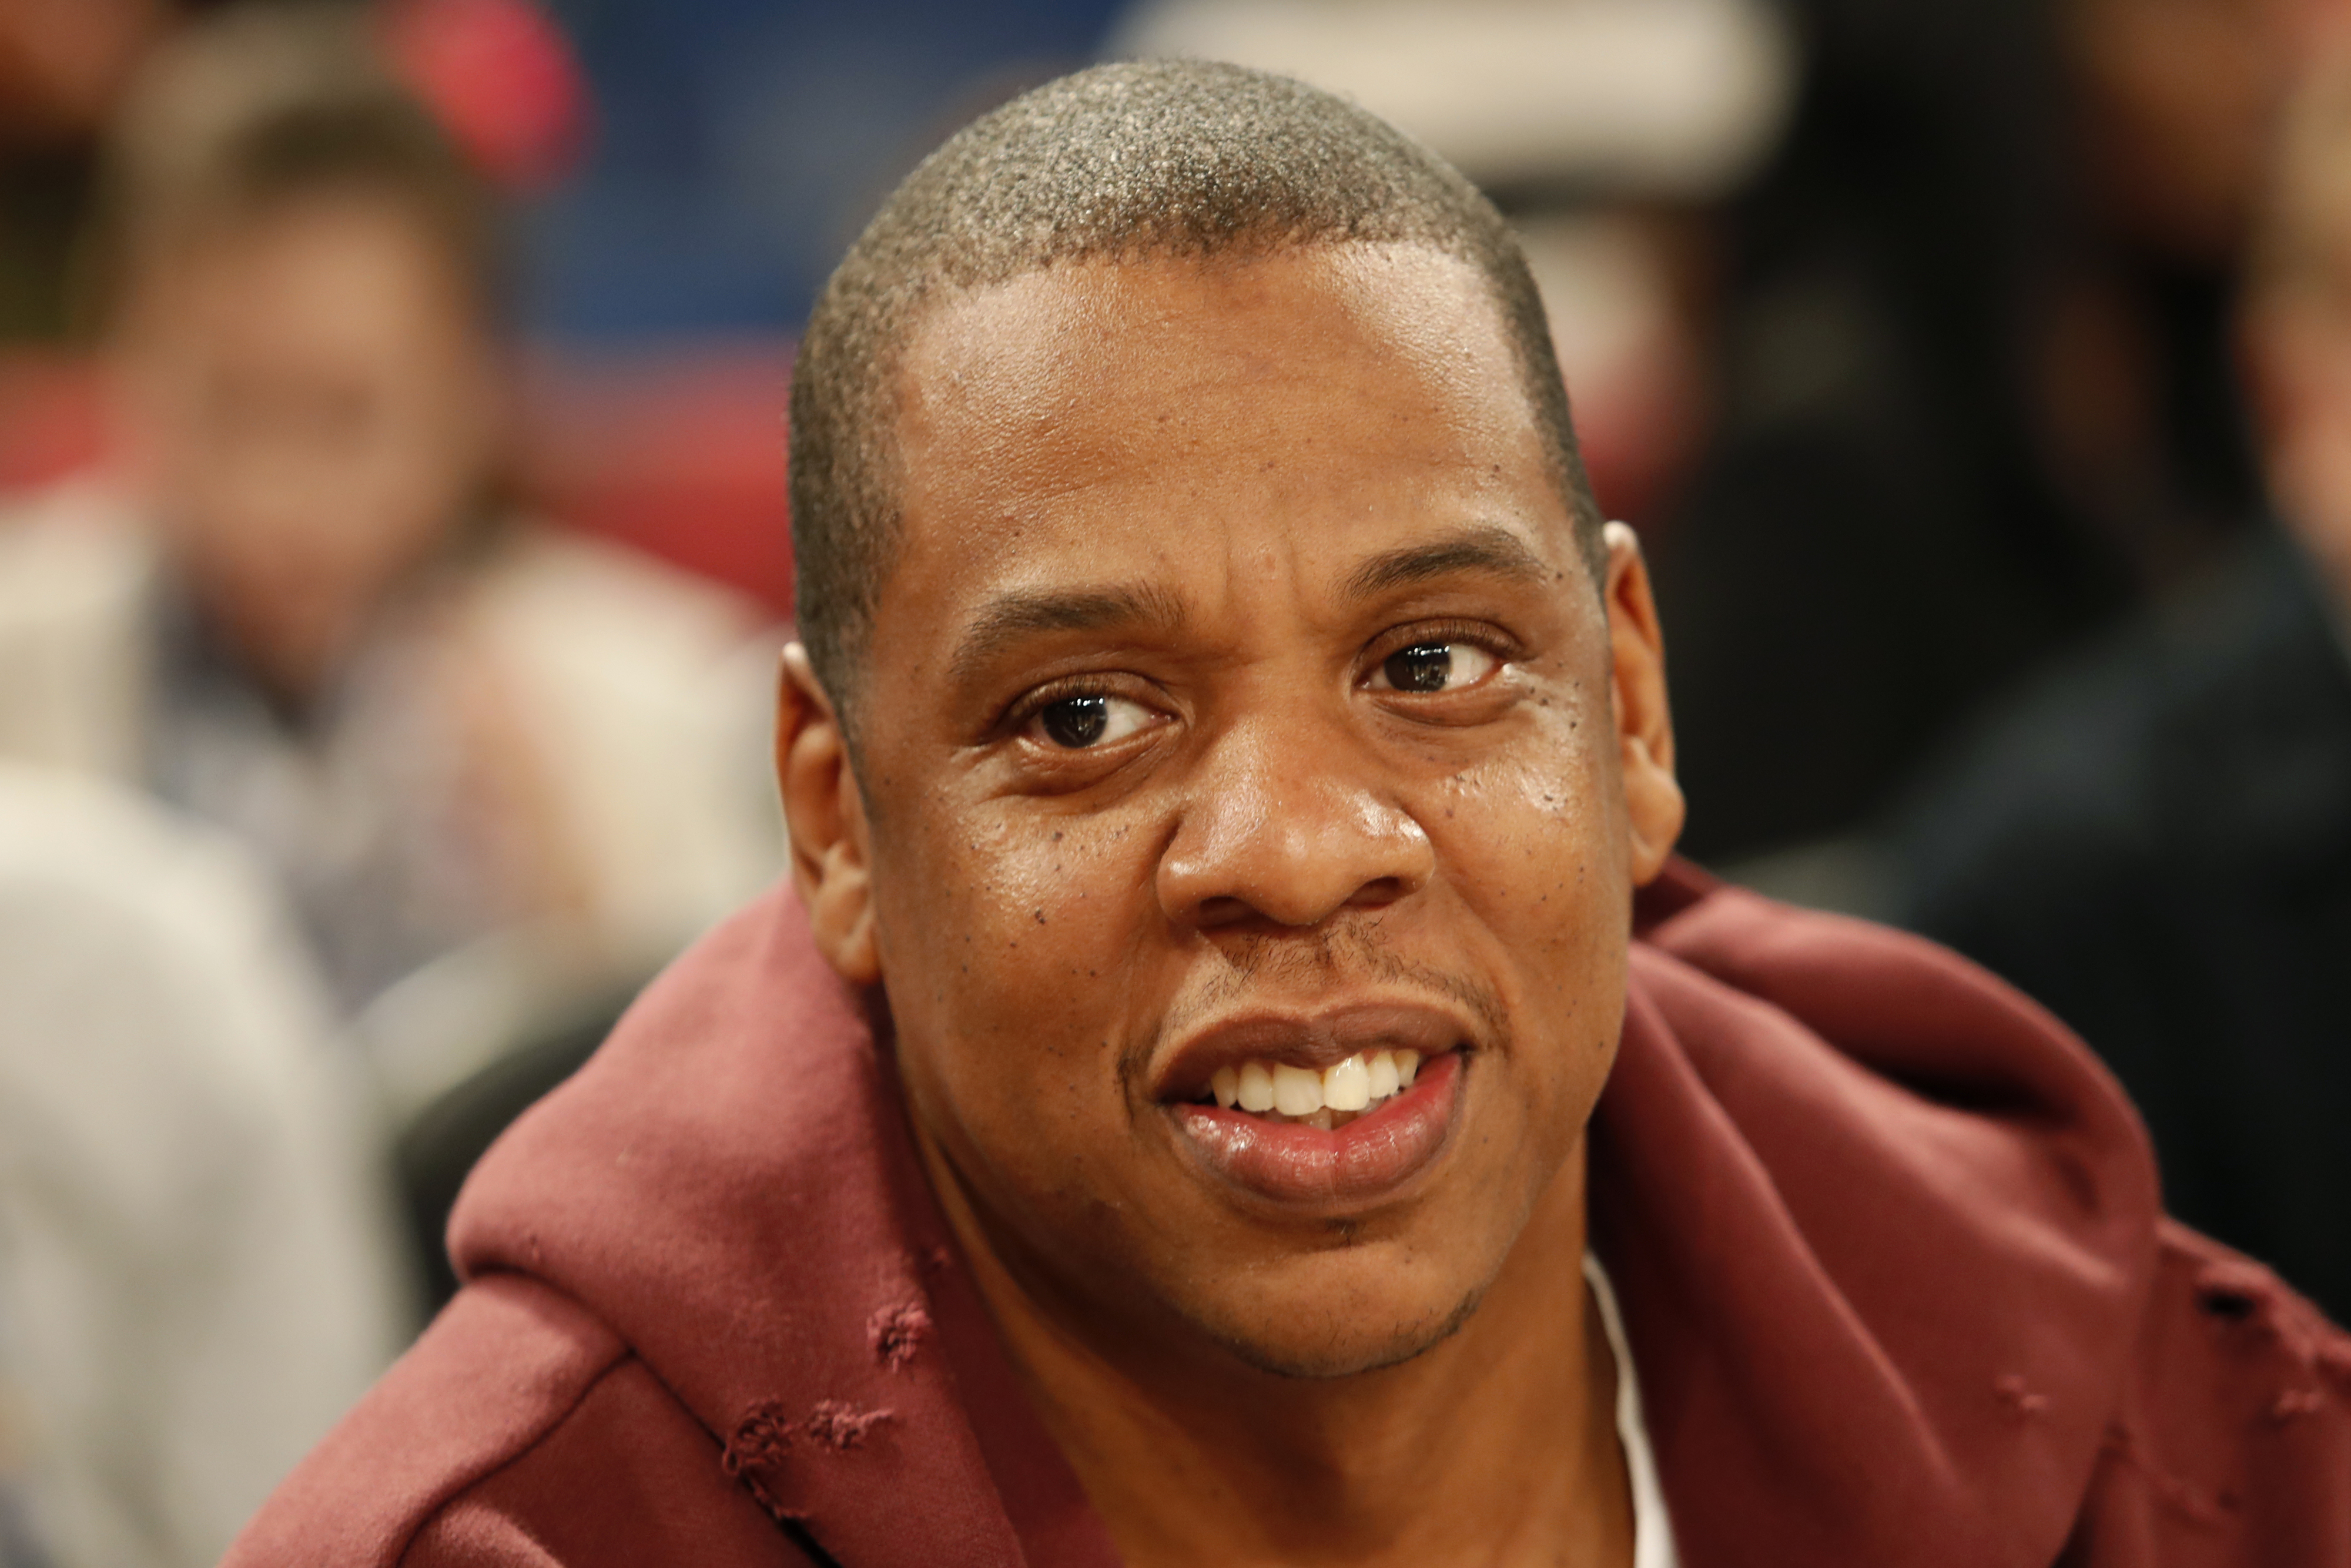 Close-up of Jay-Z in a hooded sweatshirt, smiling at an event